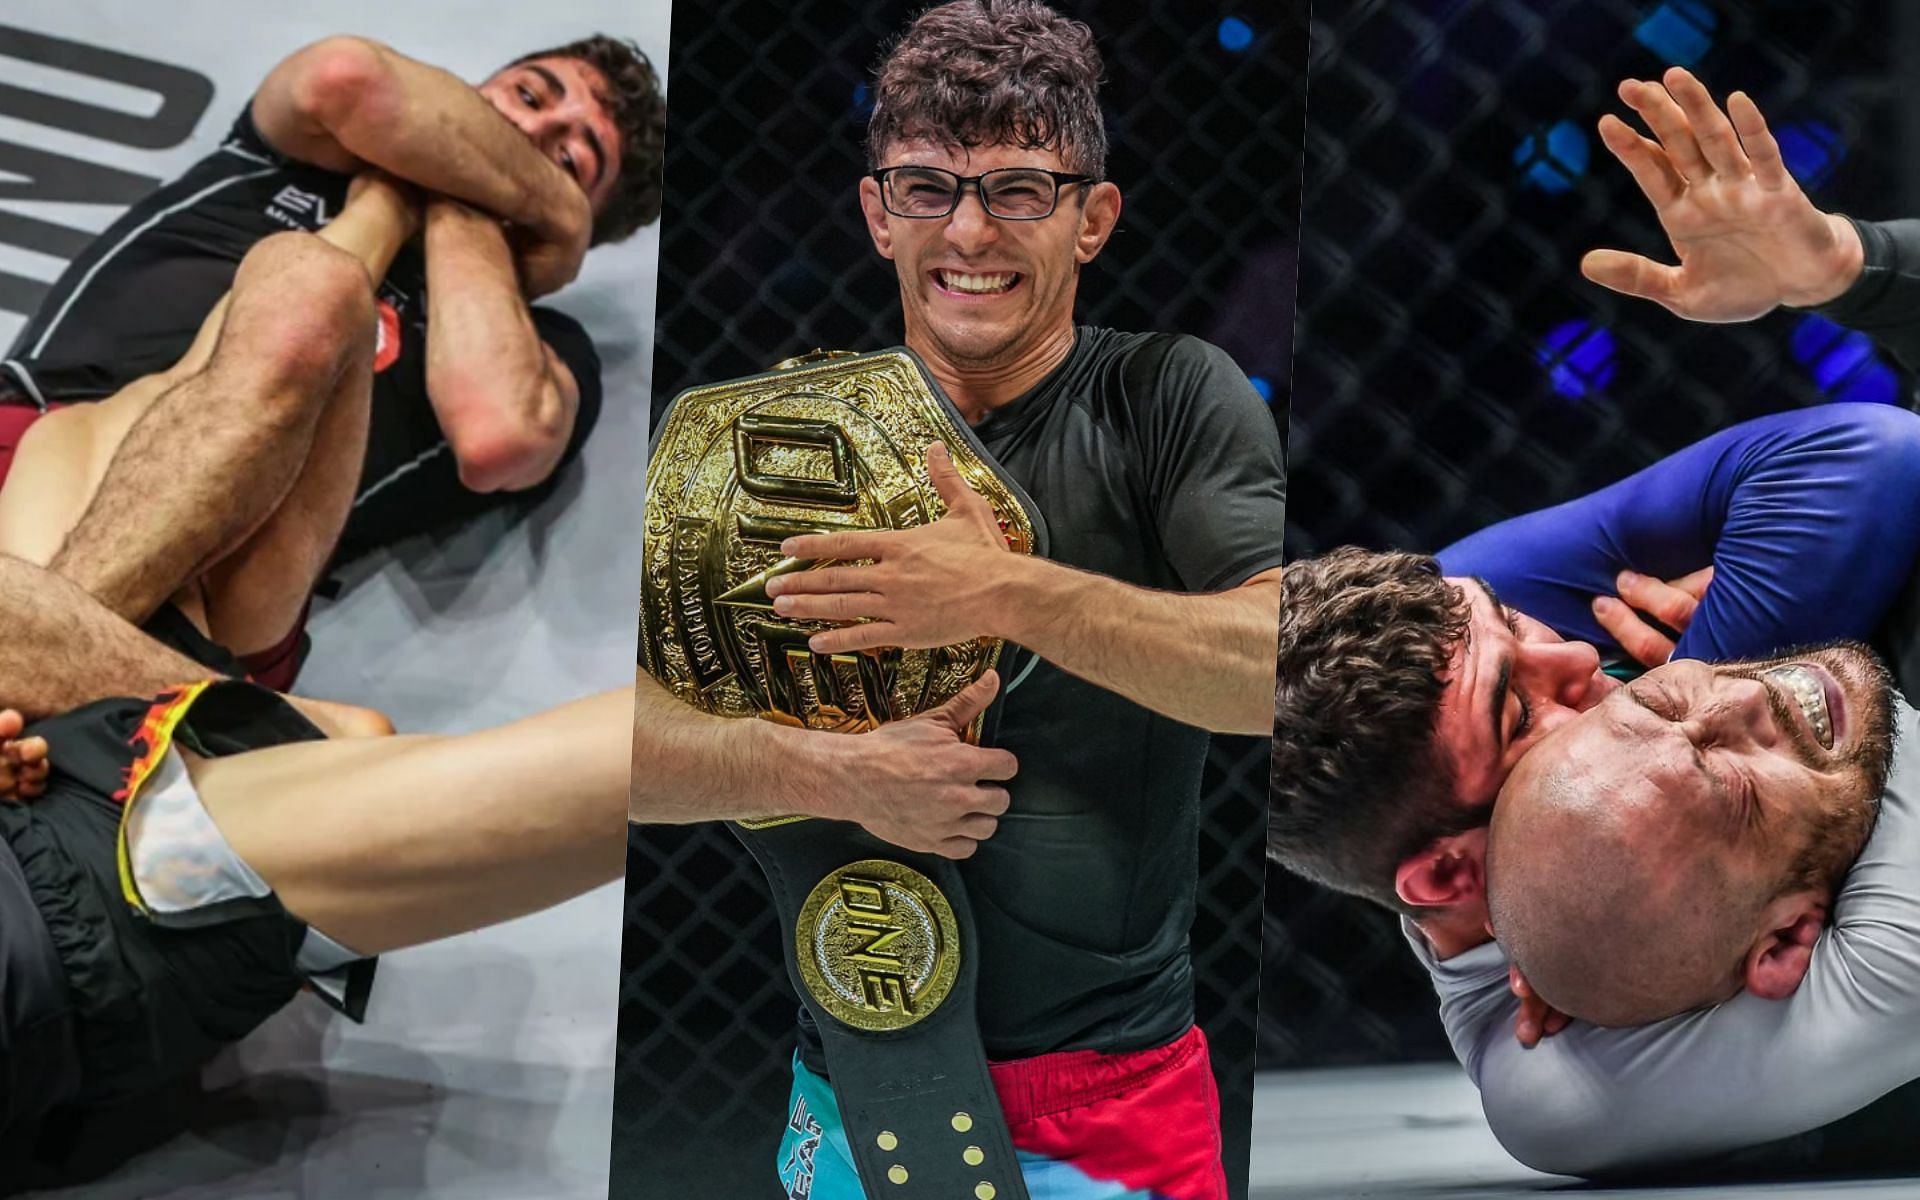 Mikey Musumeci | Photo by ONE Championship